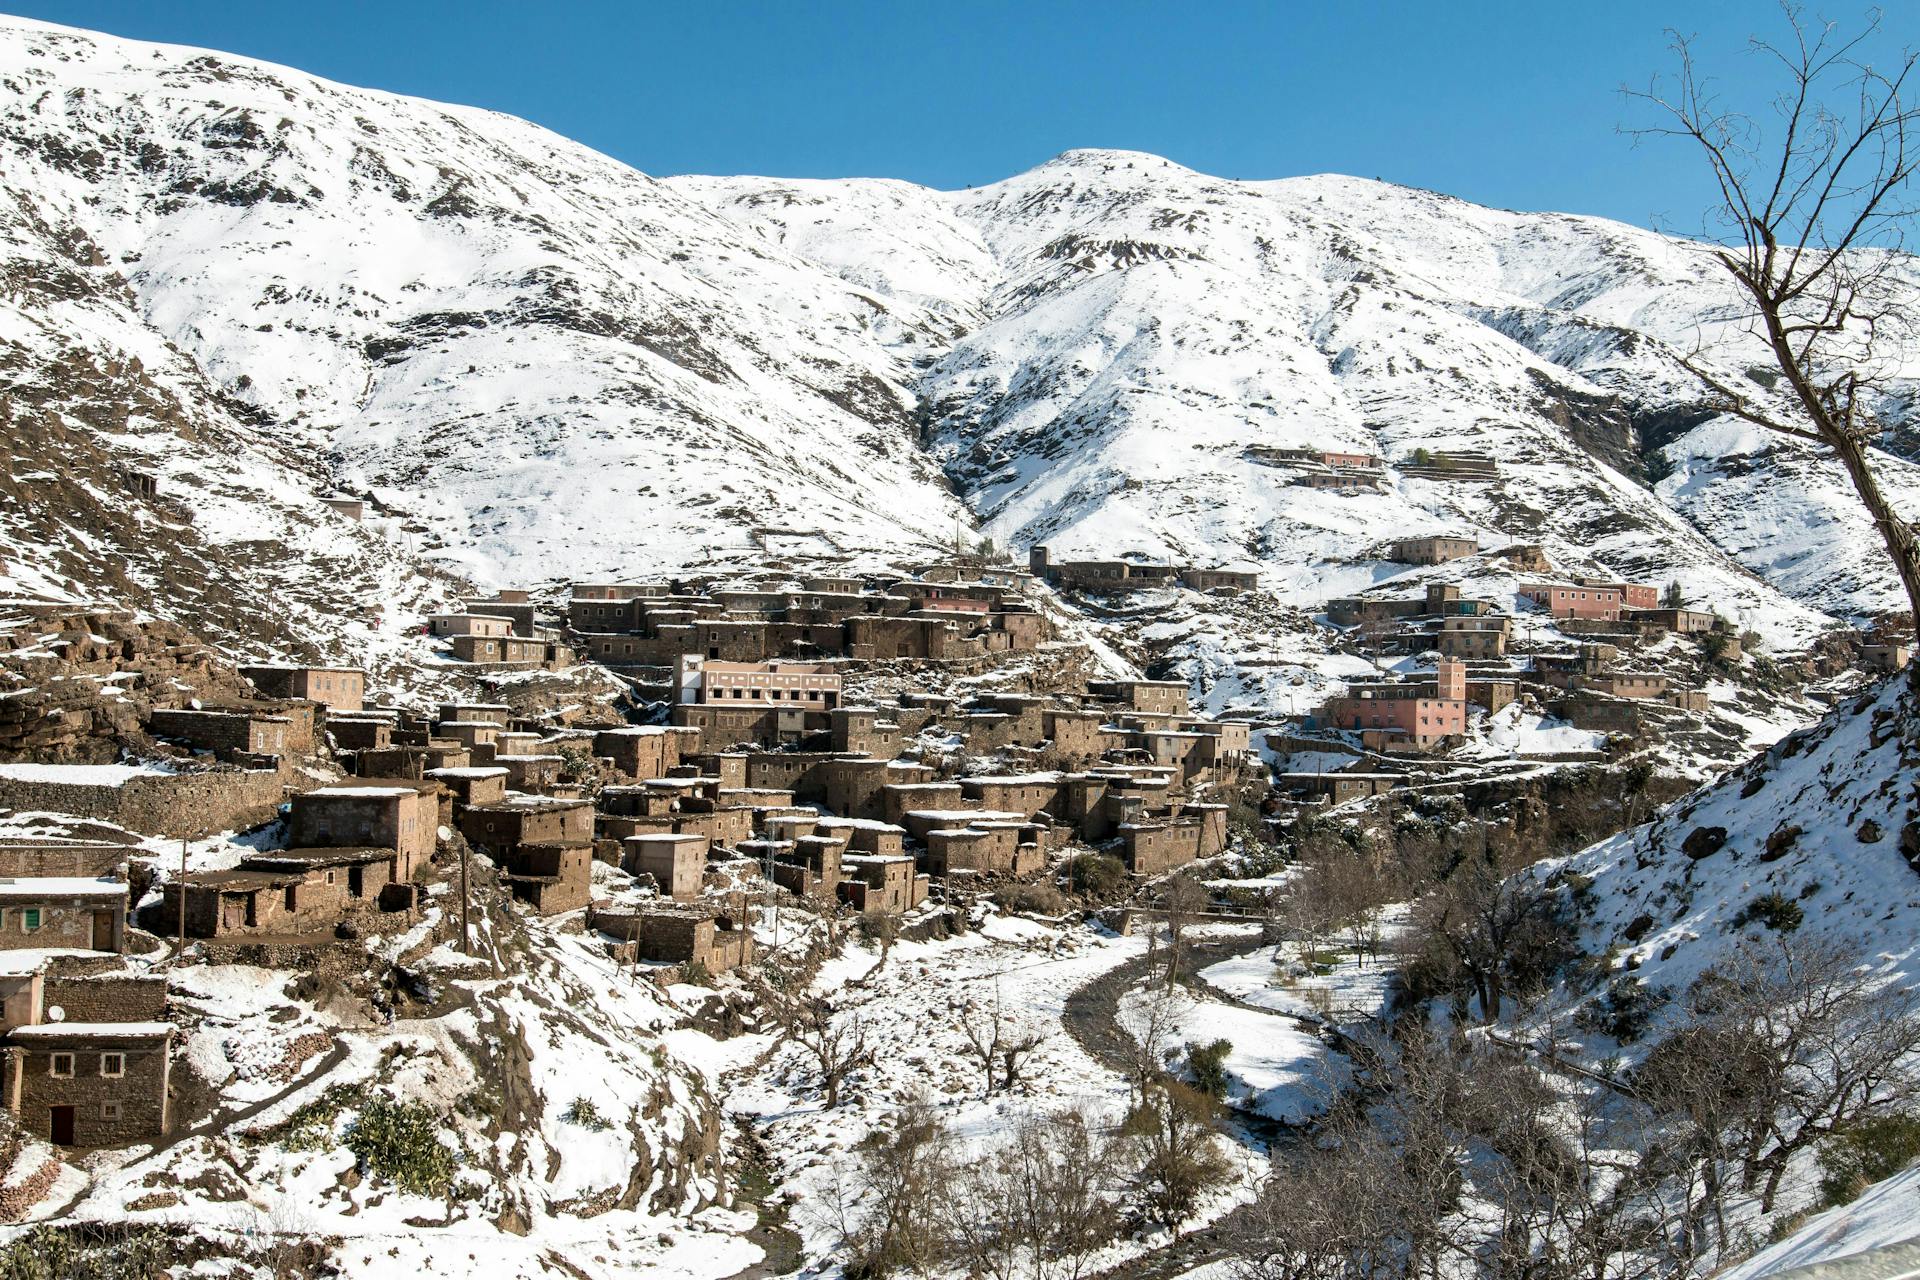 Snow in the Atlas mountains. 